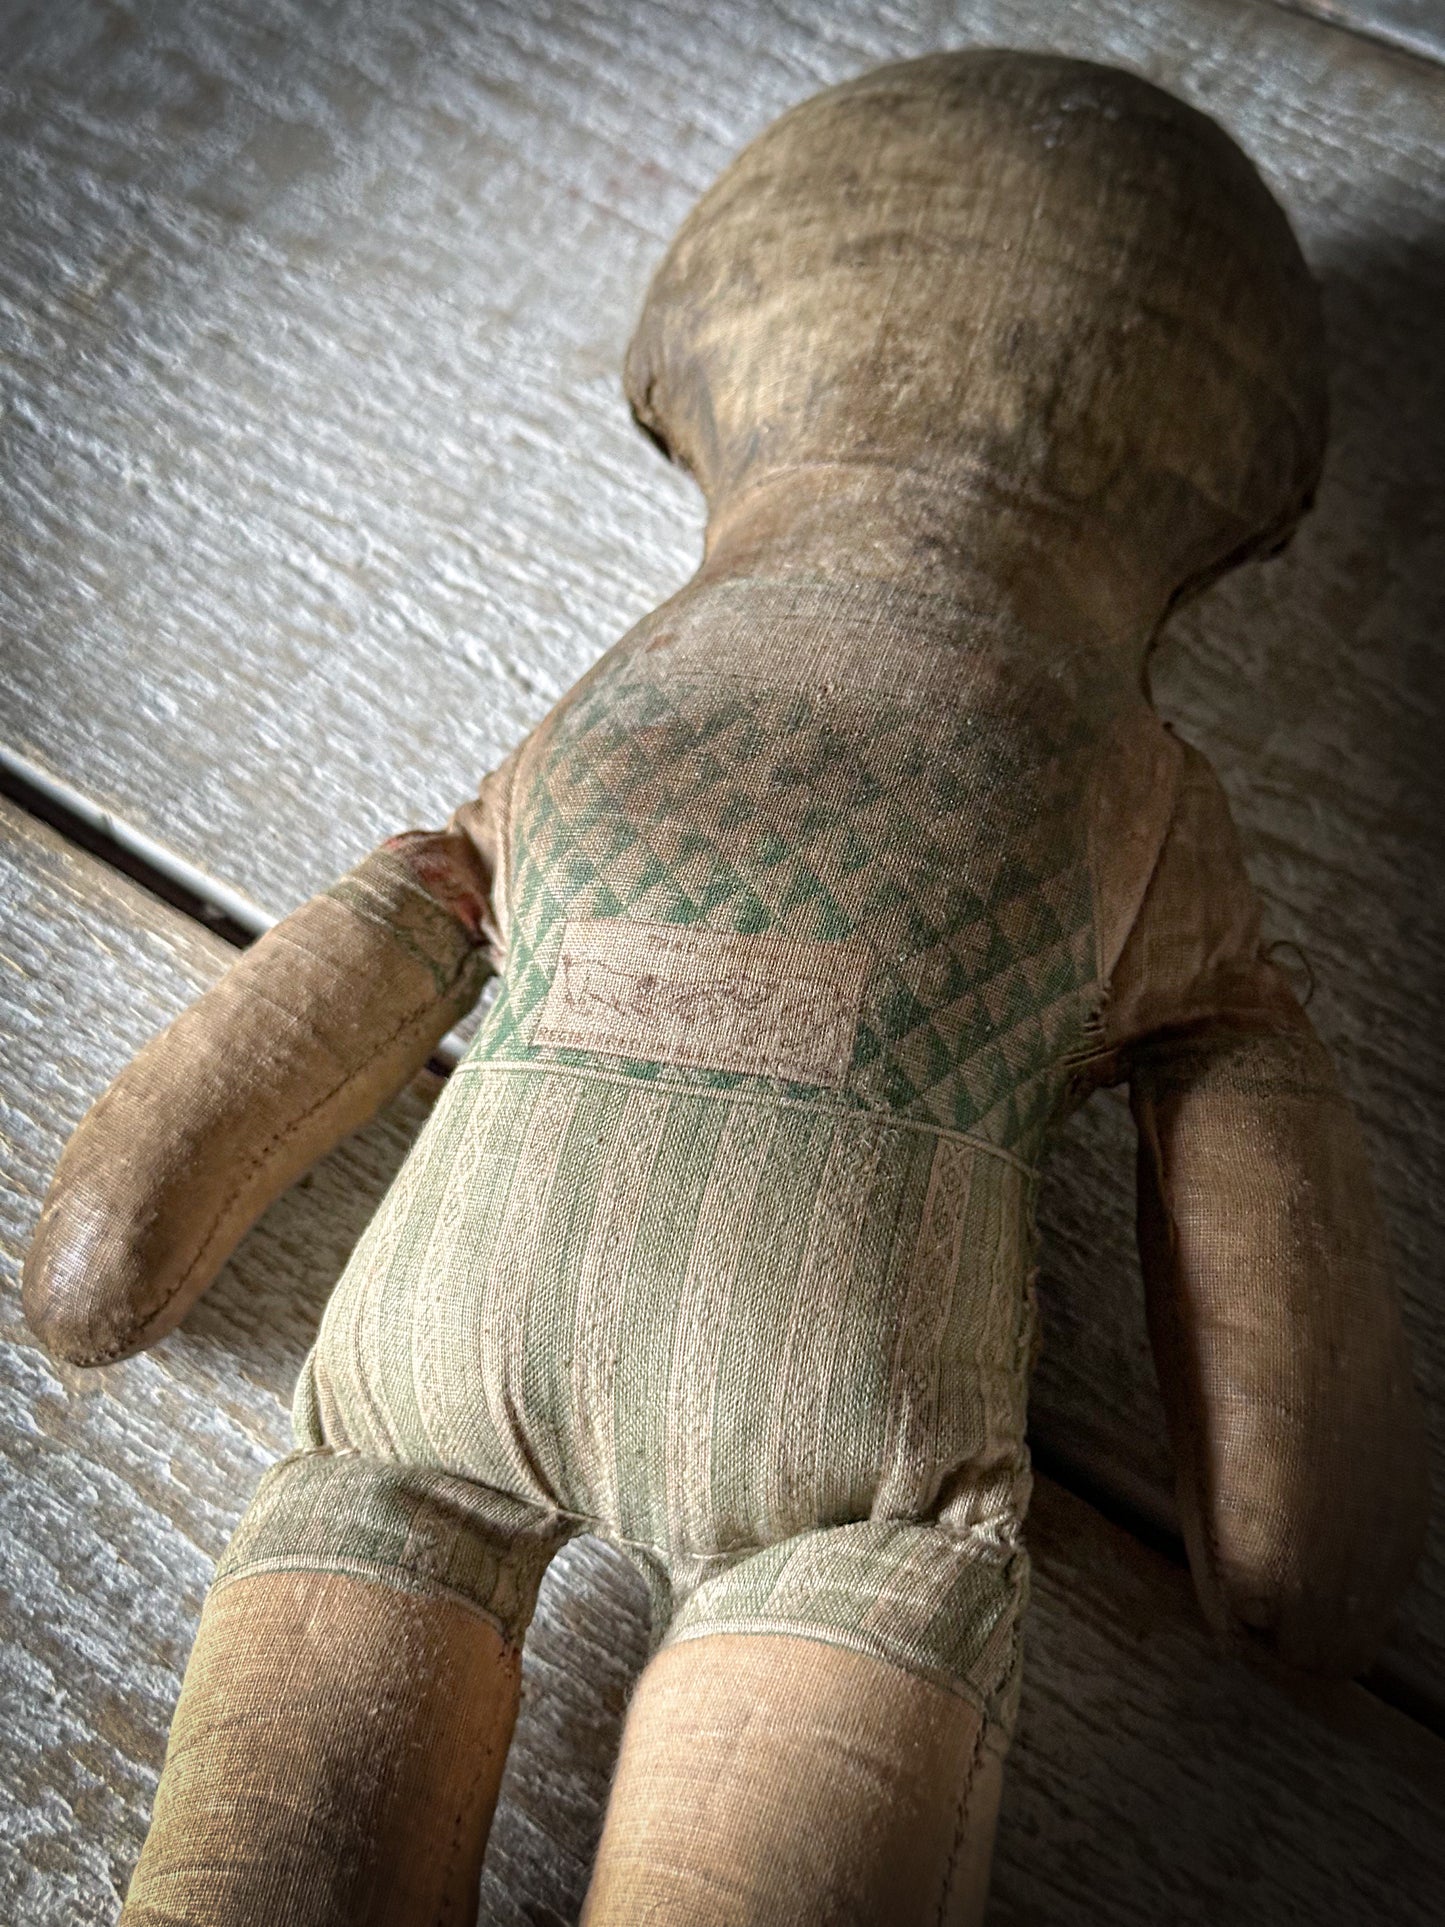 Gorgeous early Dean’s Rag book printed doll with green dress